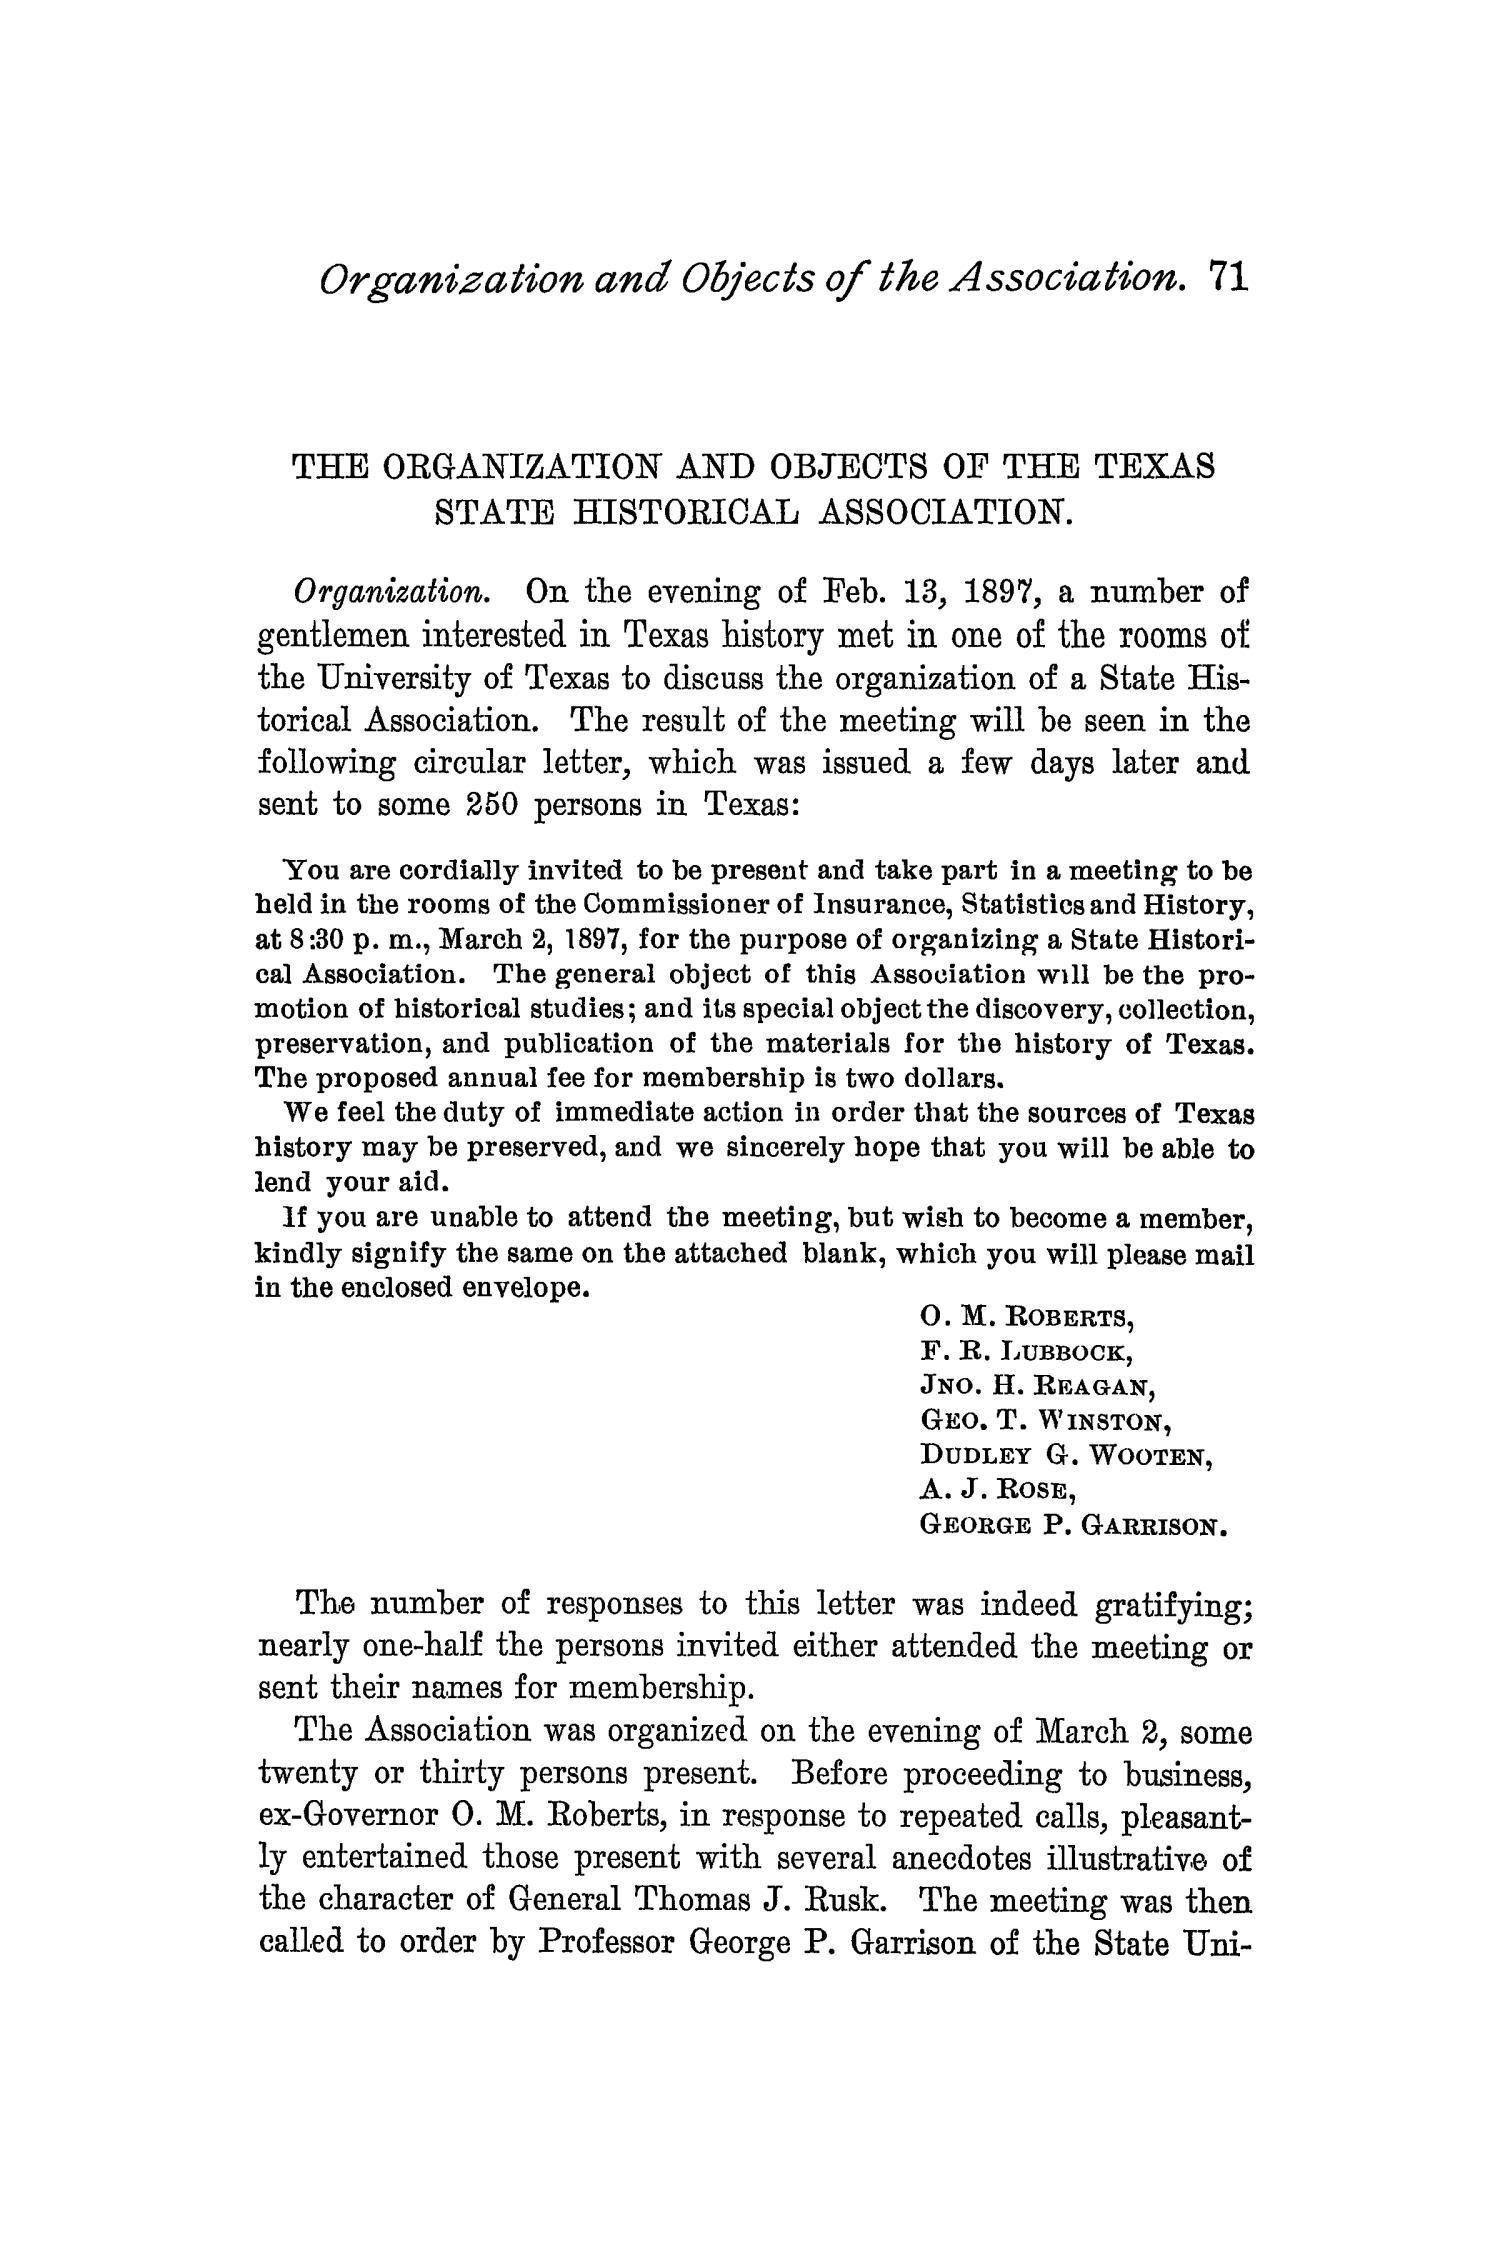 The Quarterly of the Texas State Historical Association, Volume 1, July 1897 - April, 1898
                                                
                                                    71
                                                